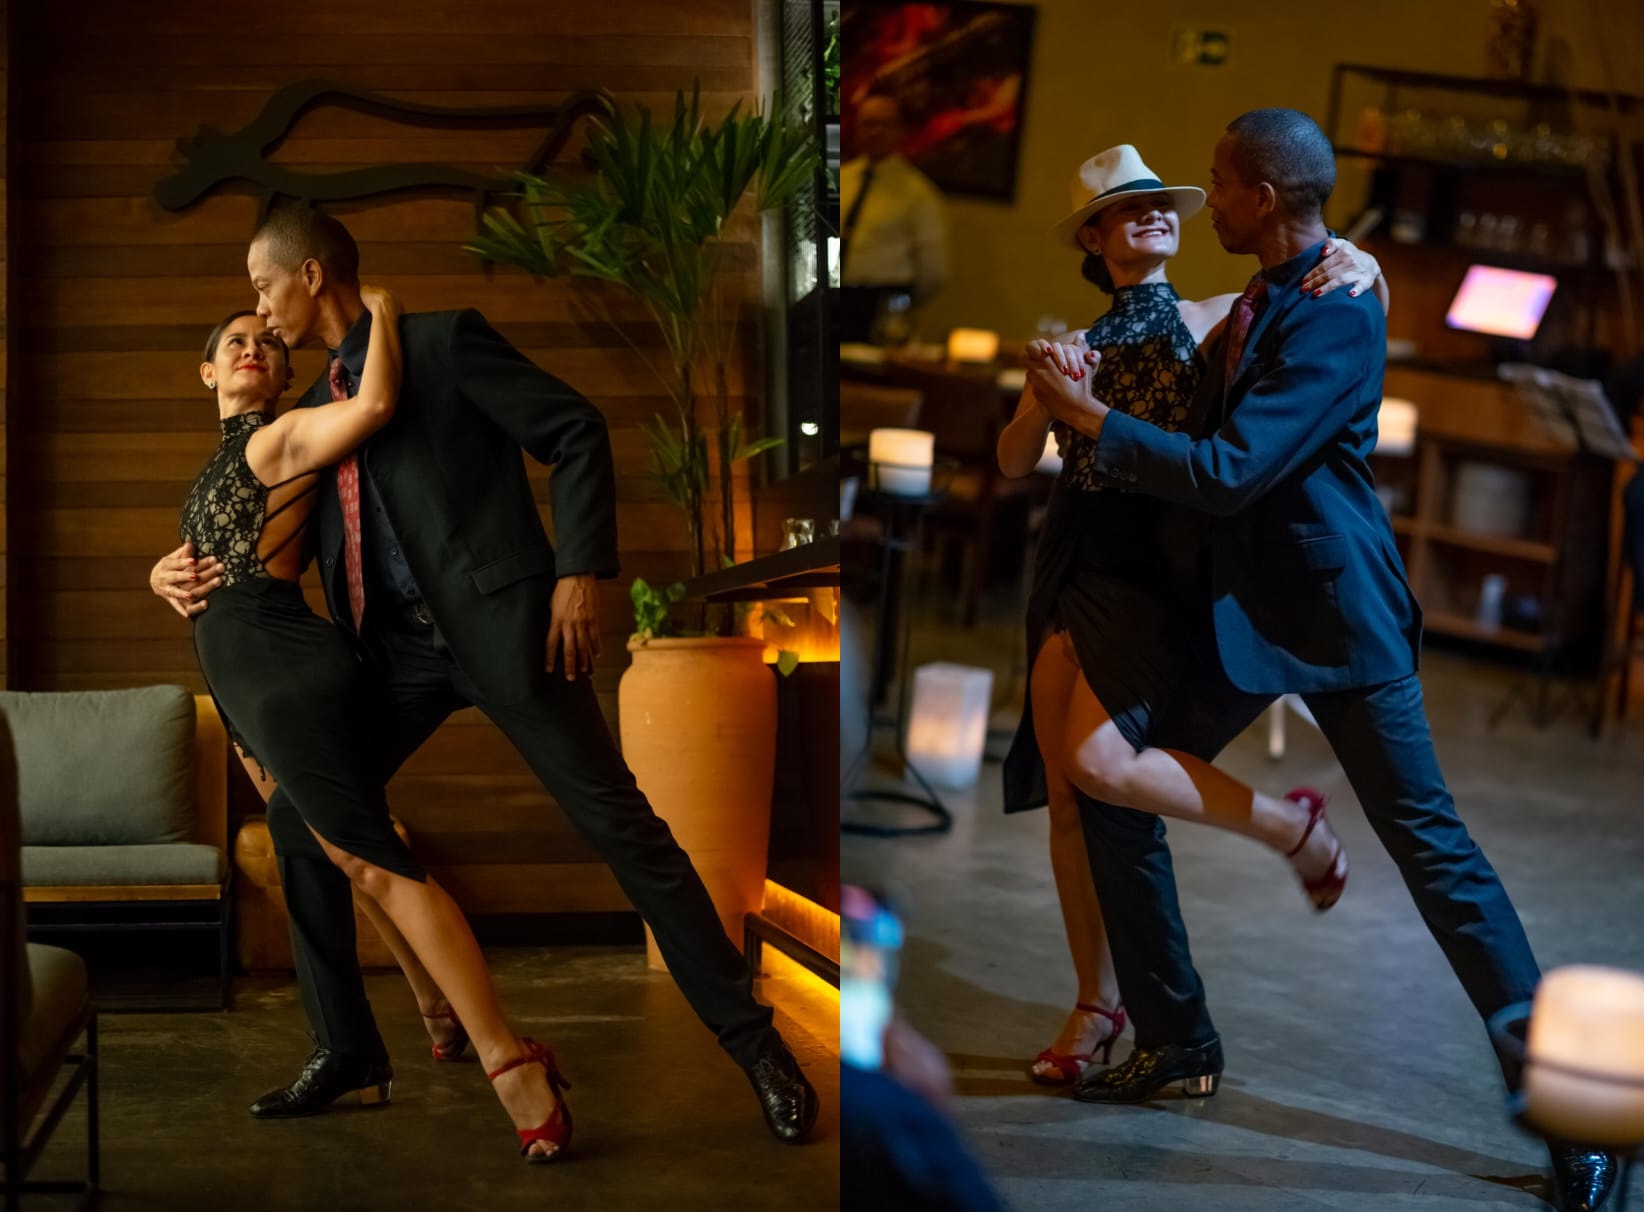 “Tango Night” and Argentine cuisine hit Friday at a restaurant in Manaus